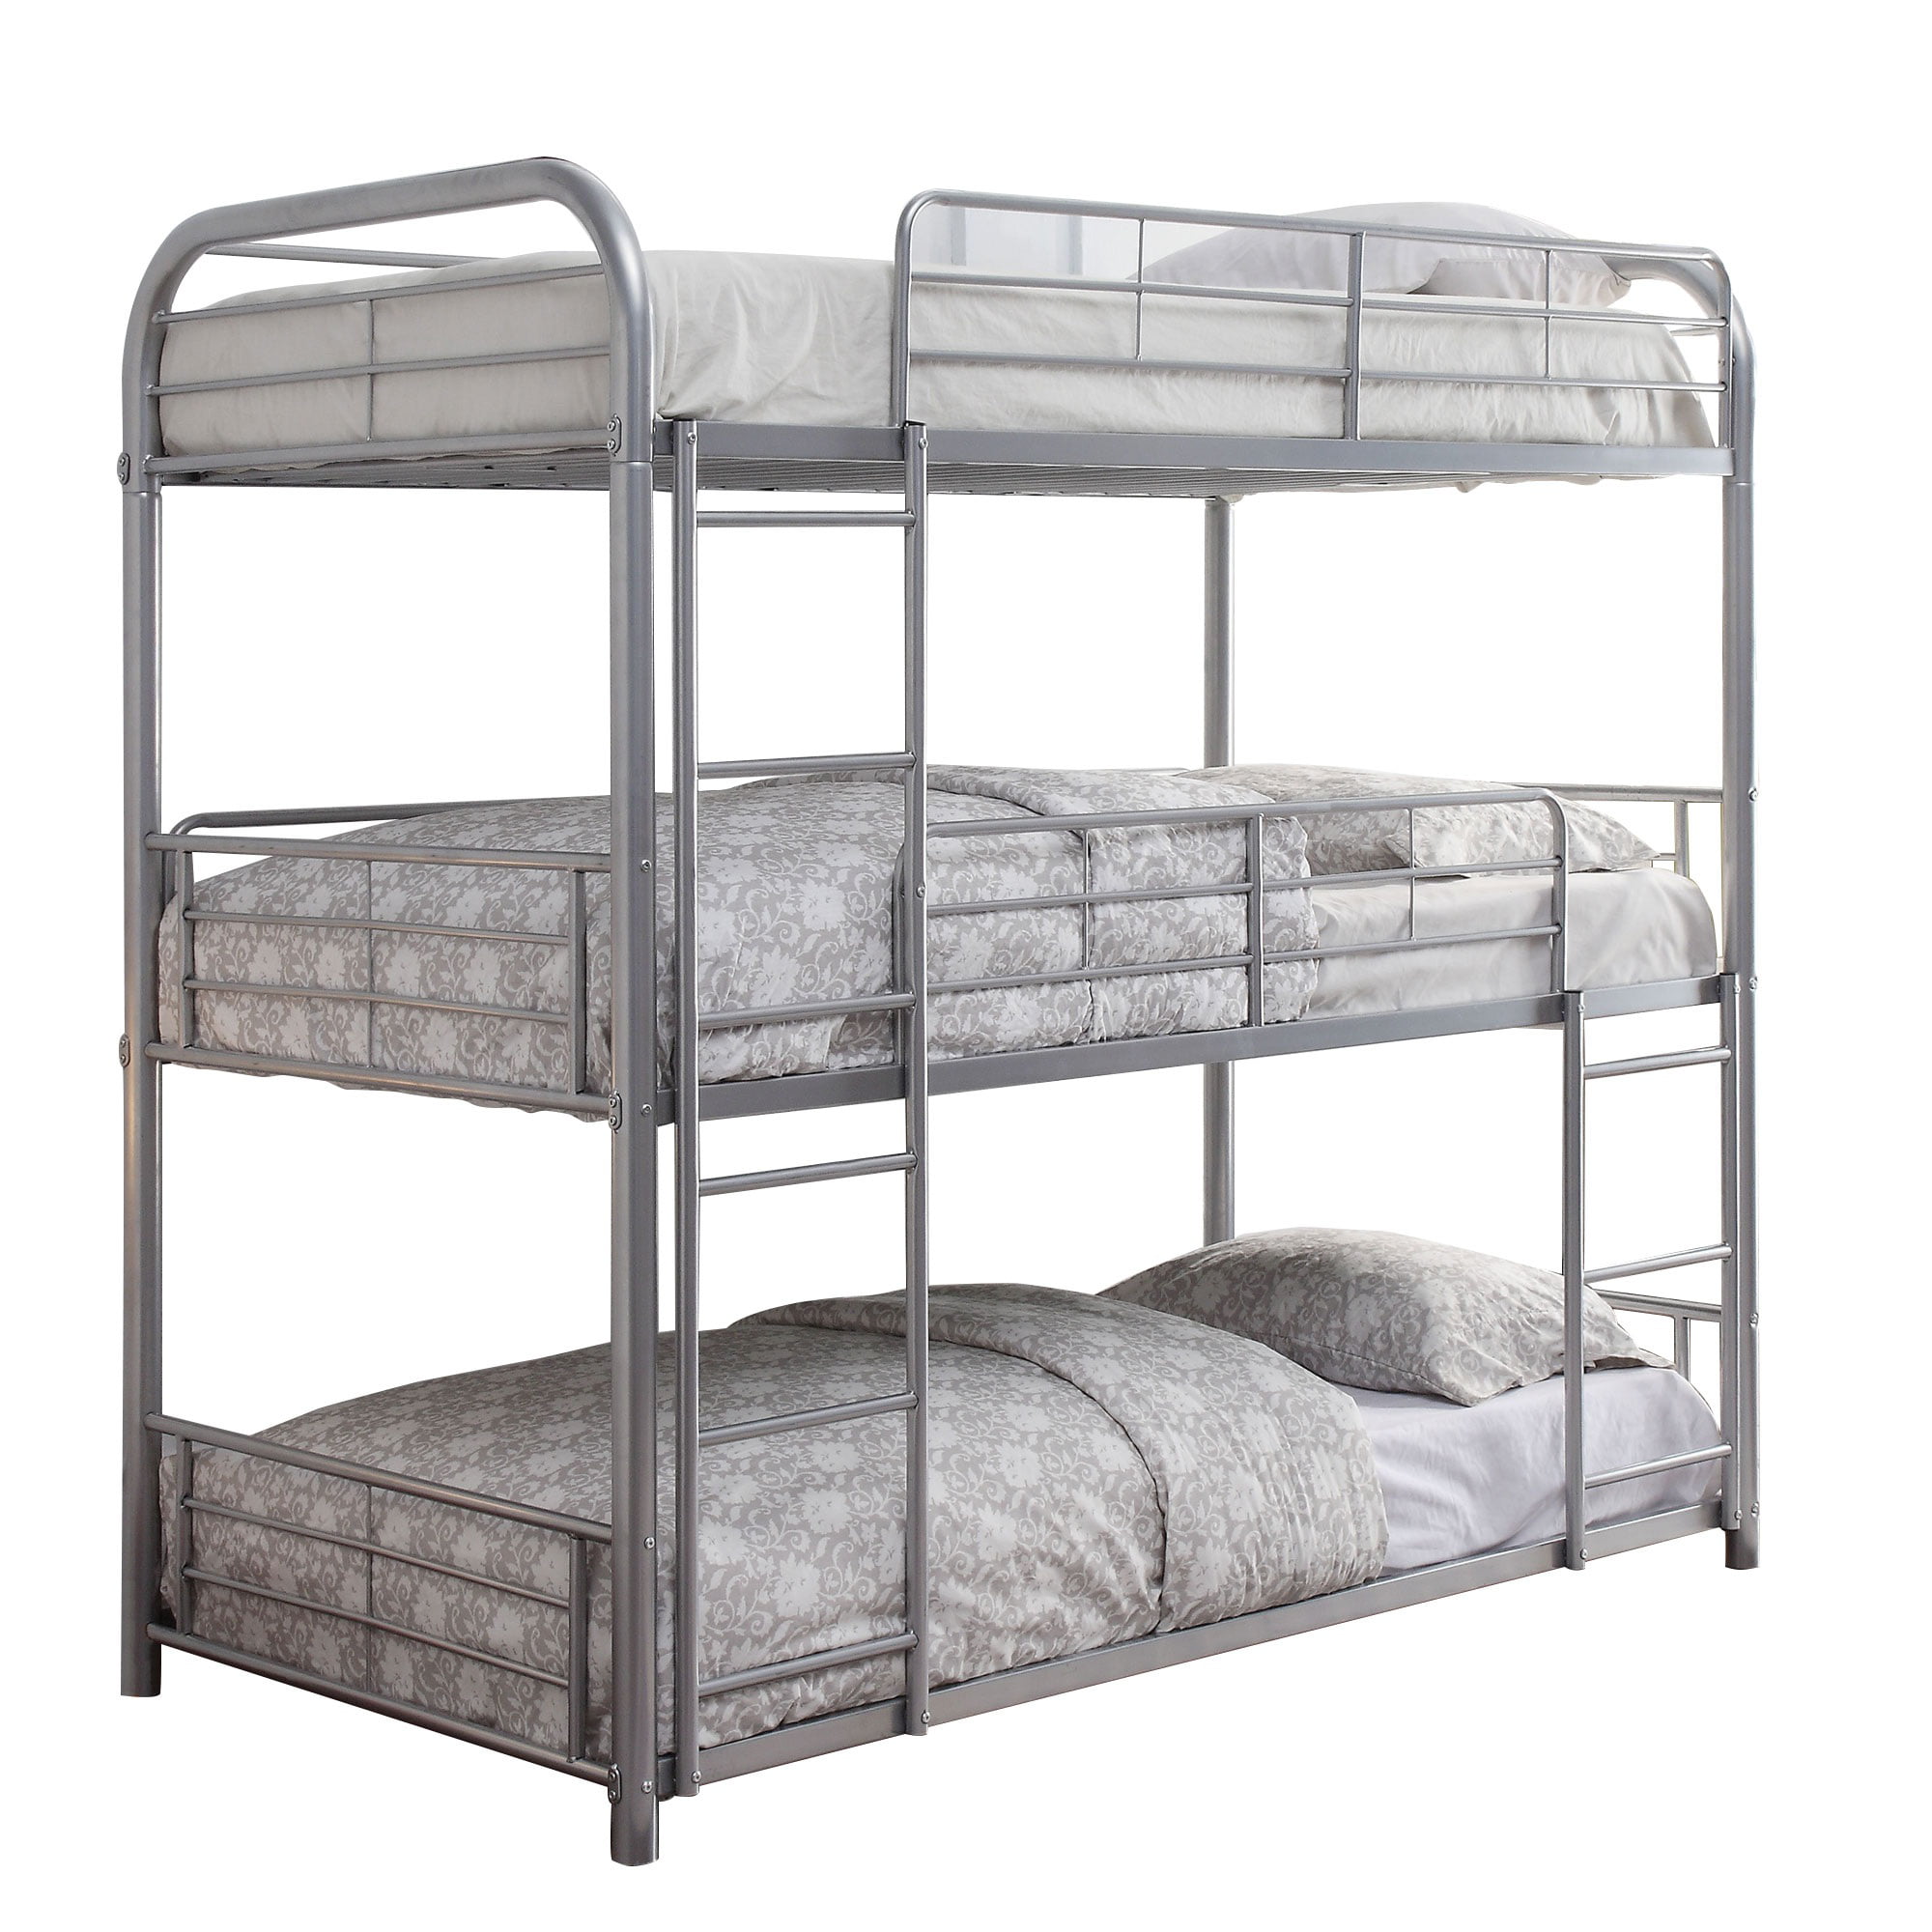 Triple Twin Over Size Bunk Bed, How Wide Is A Bunk Bed